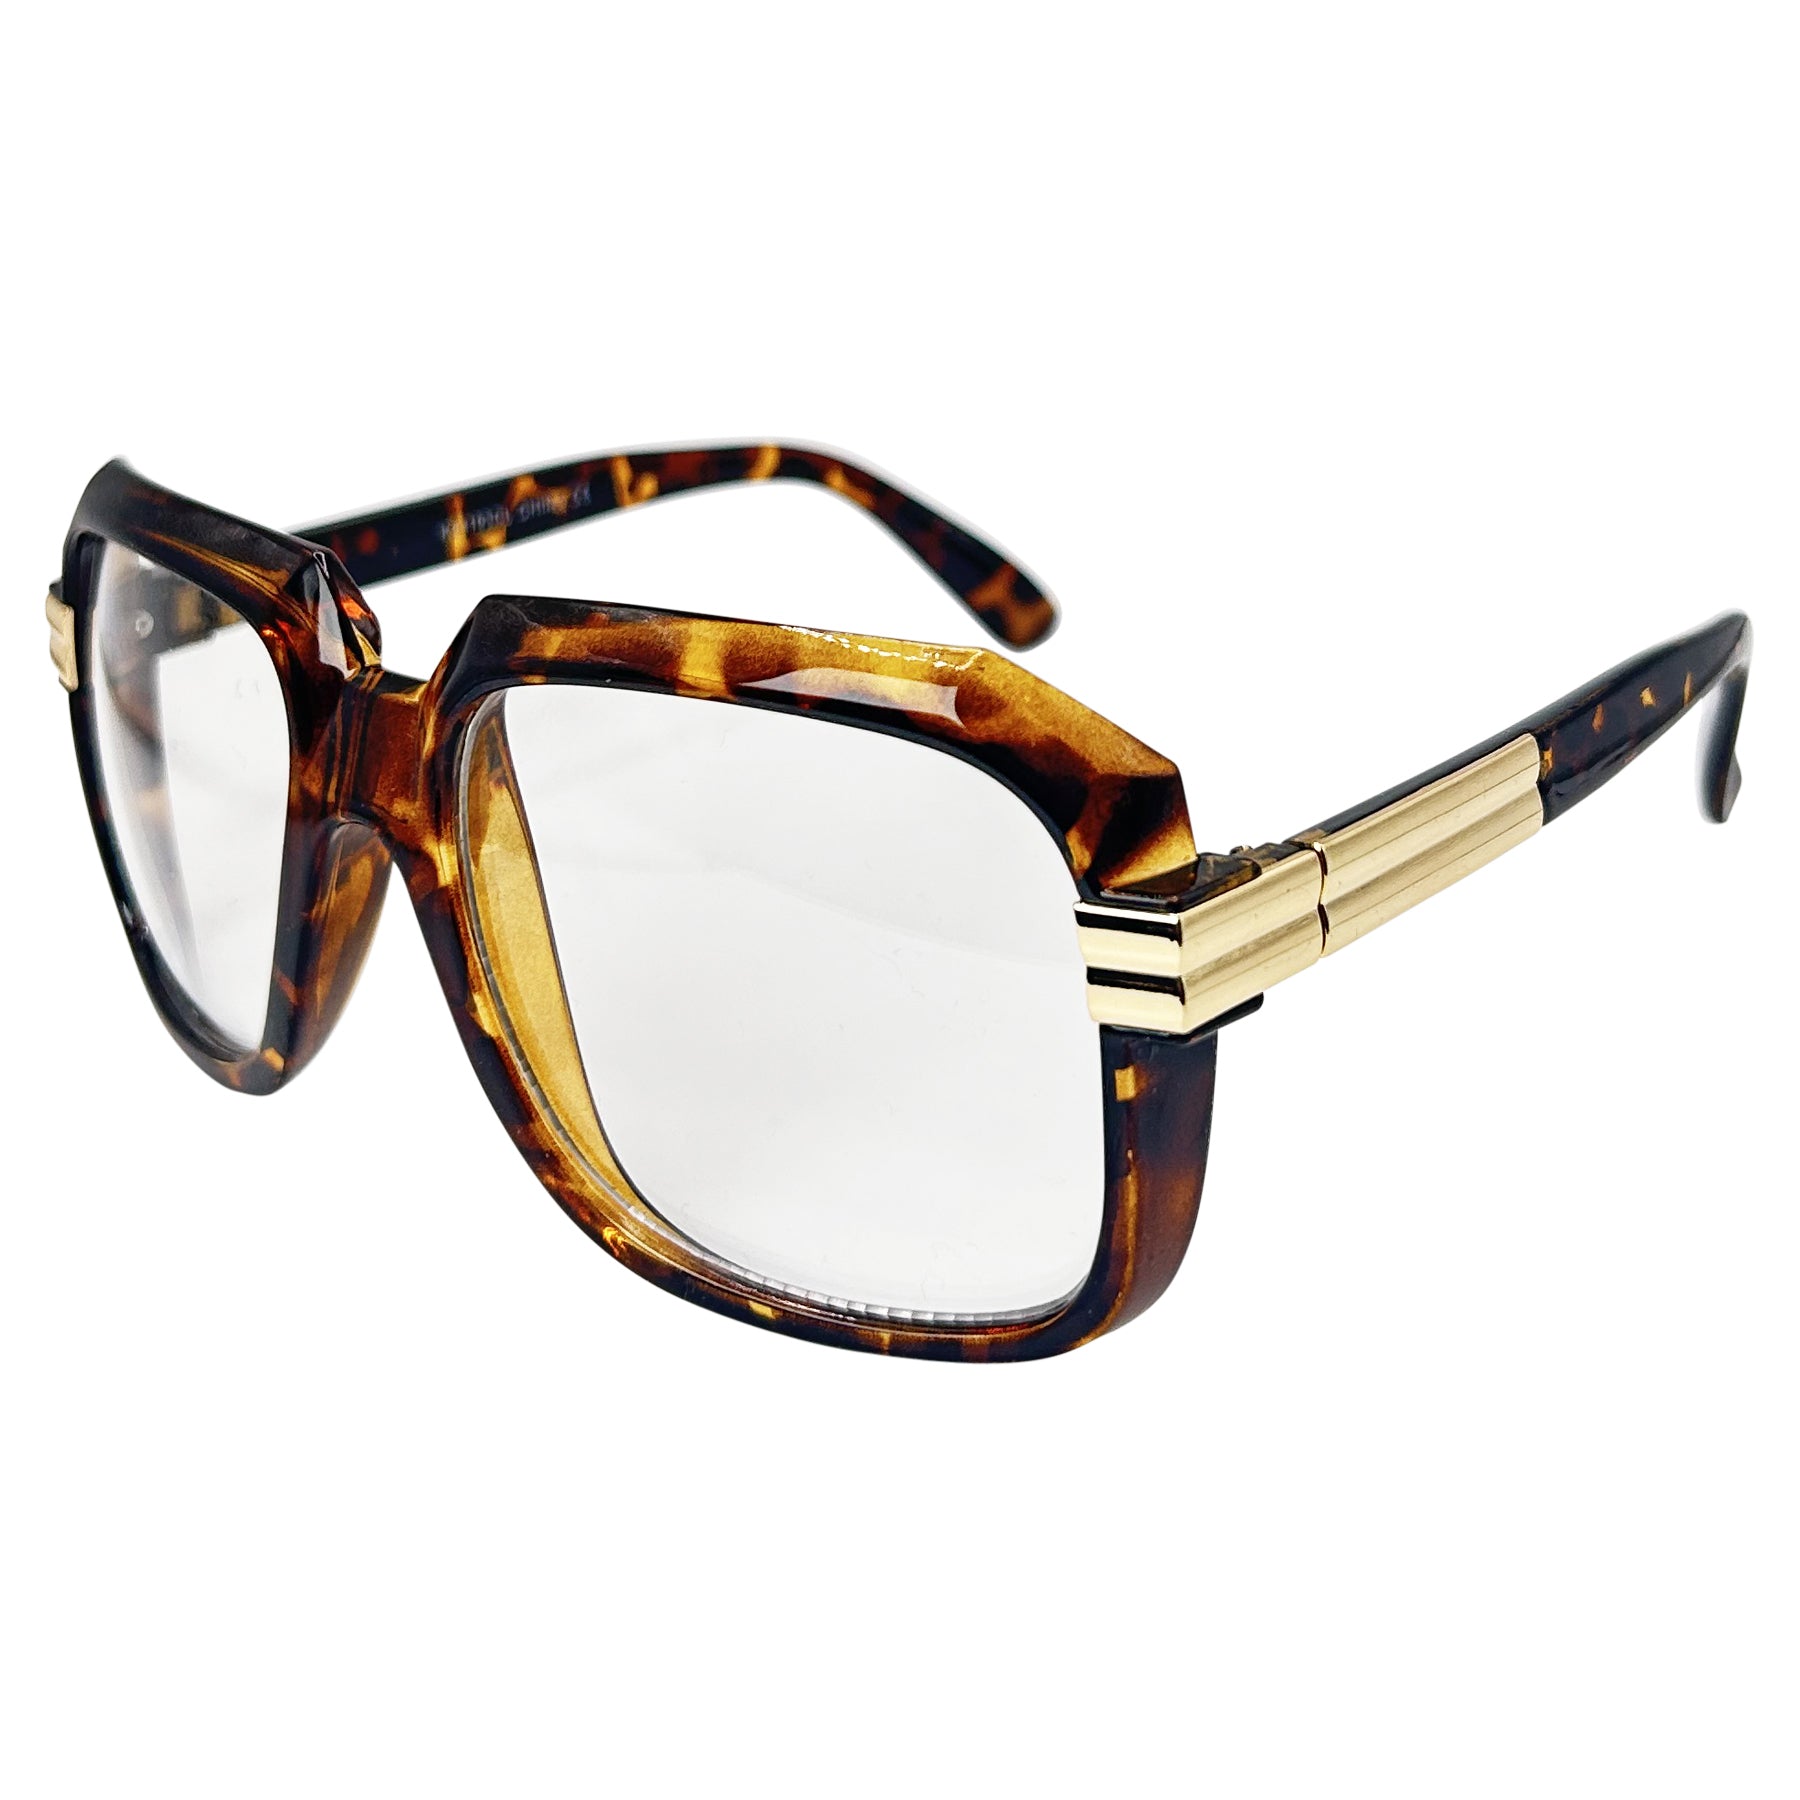 vintage glasses with an oversized square style frame